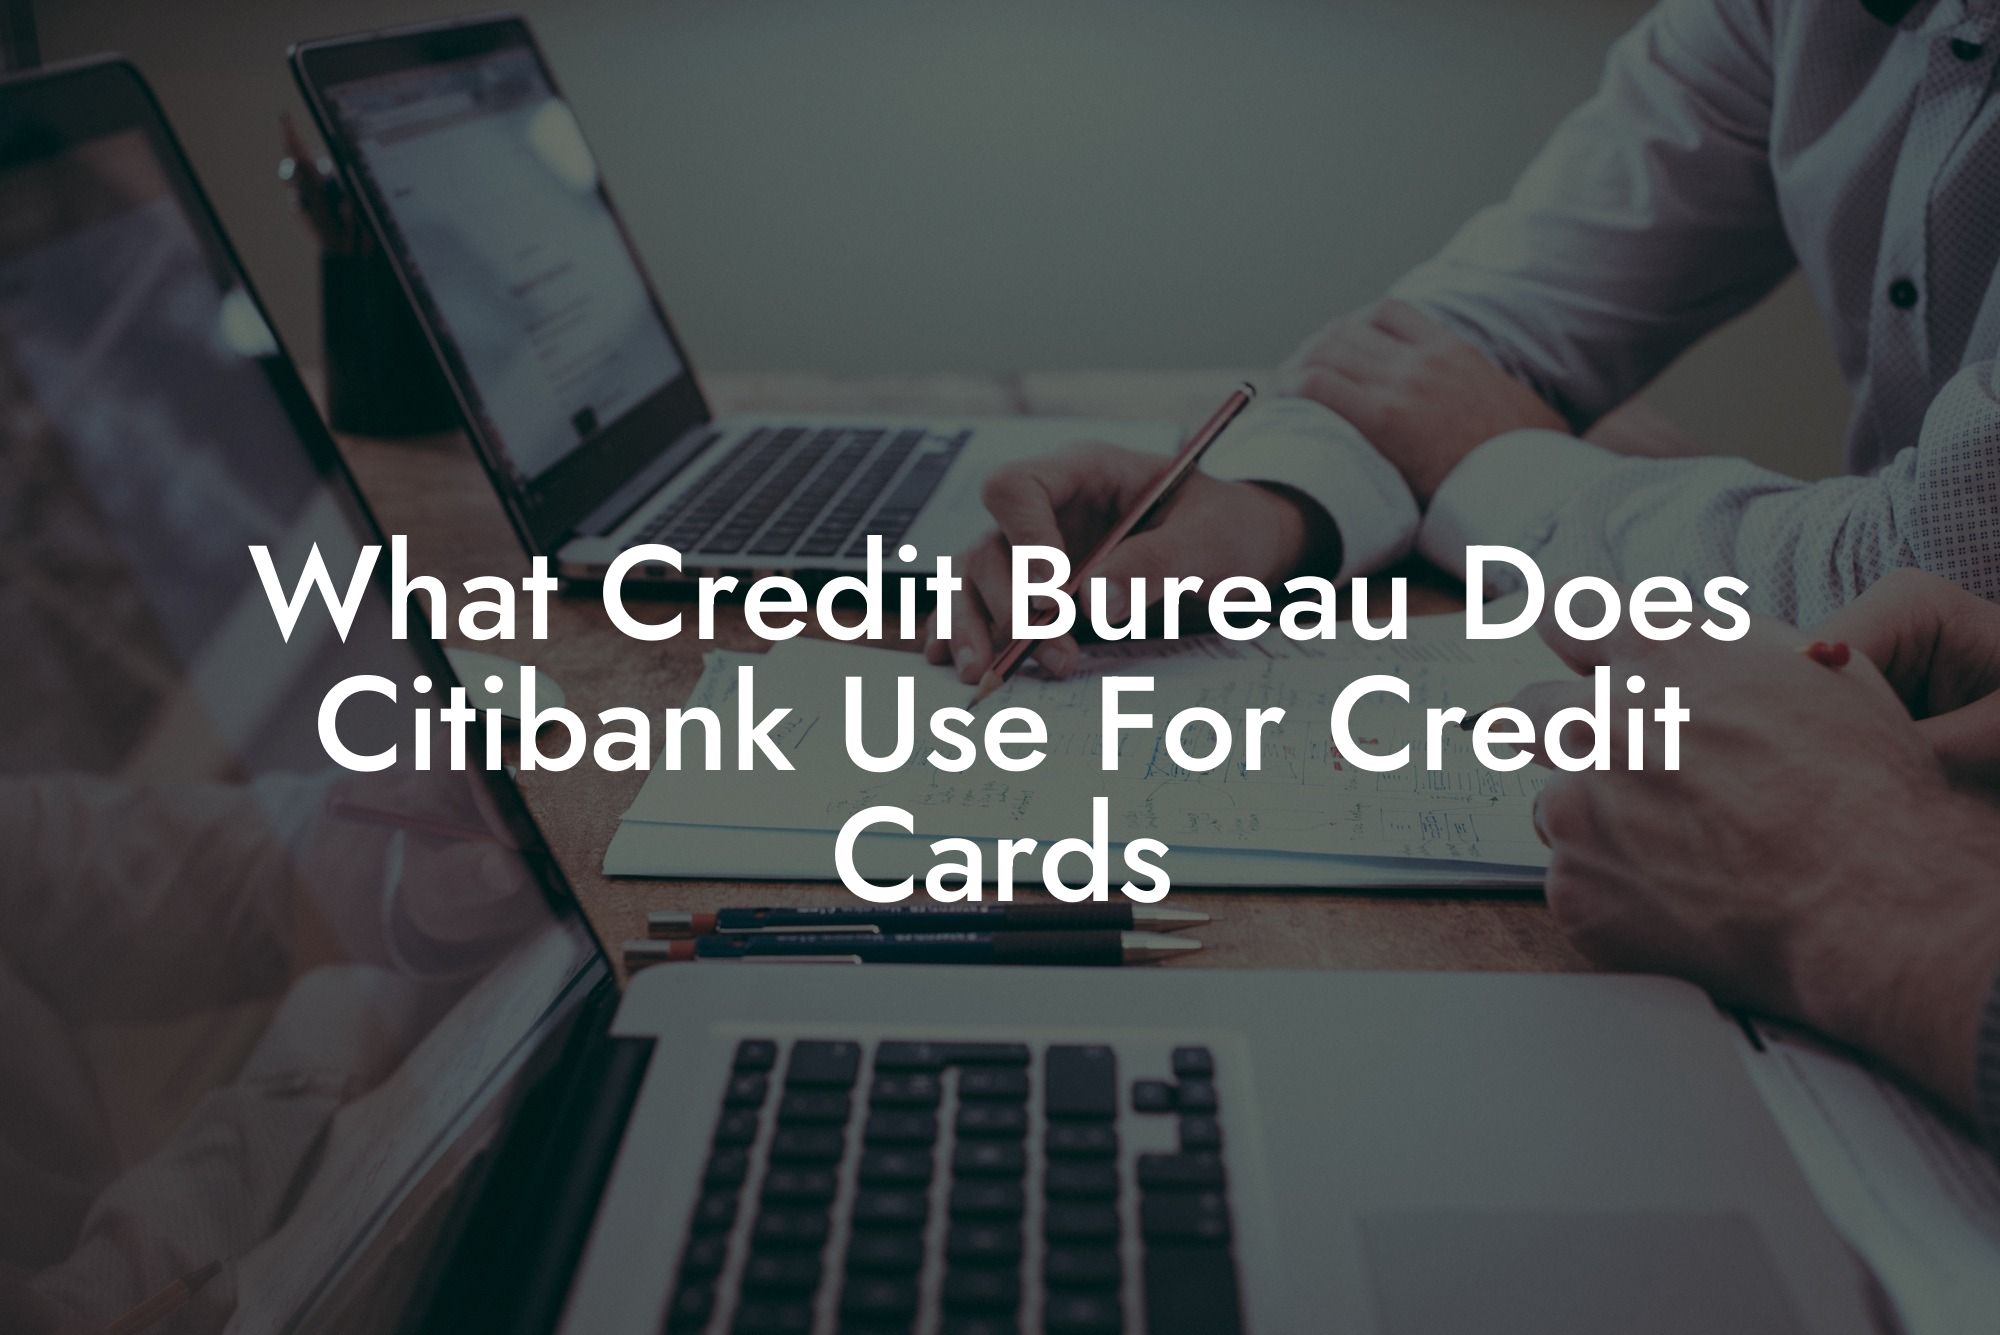 What Credit Bureau Does Citibank Use For Credit Cards